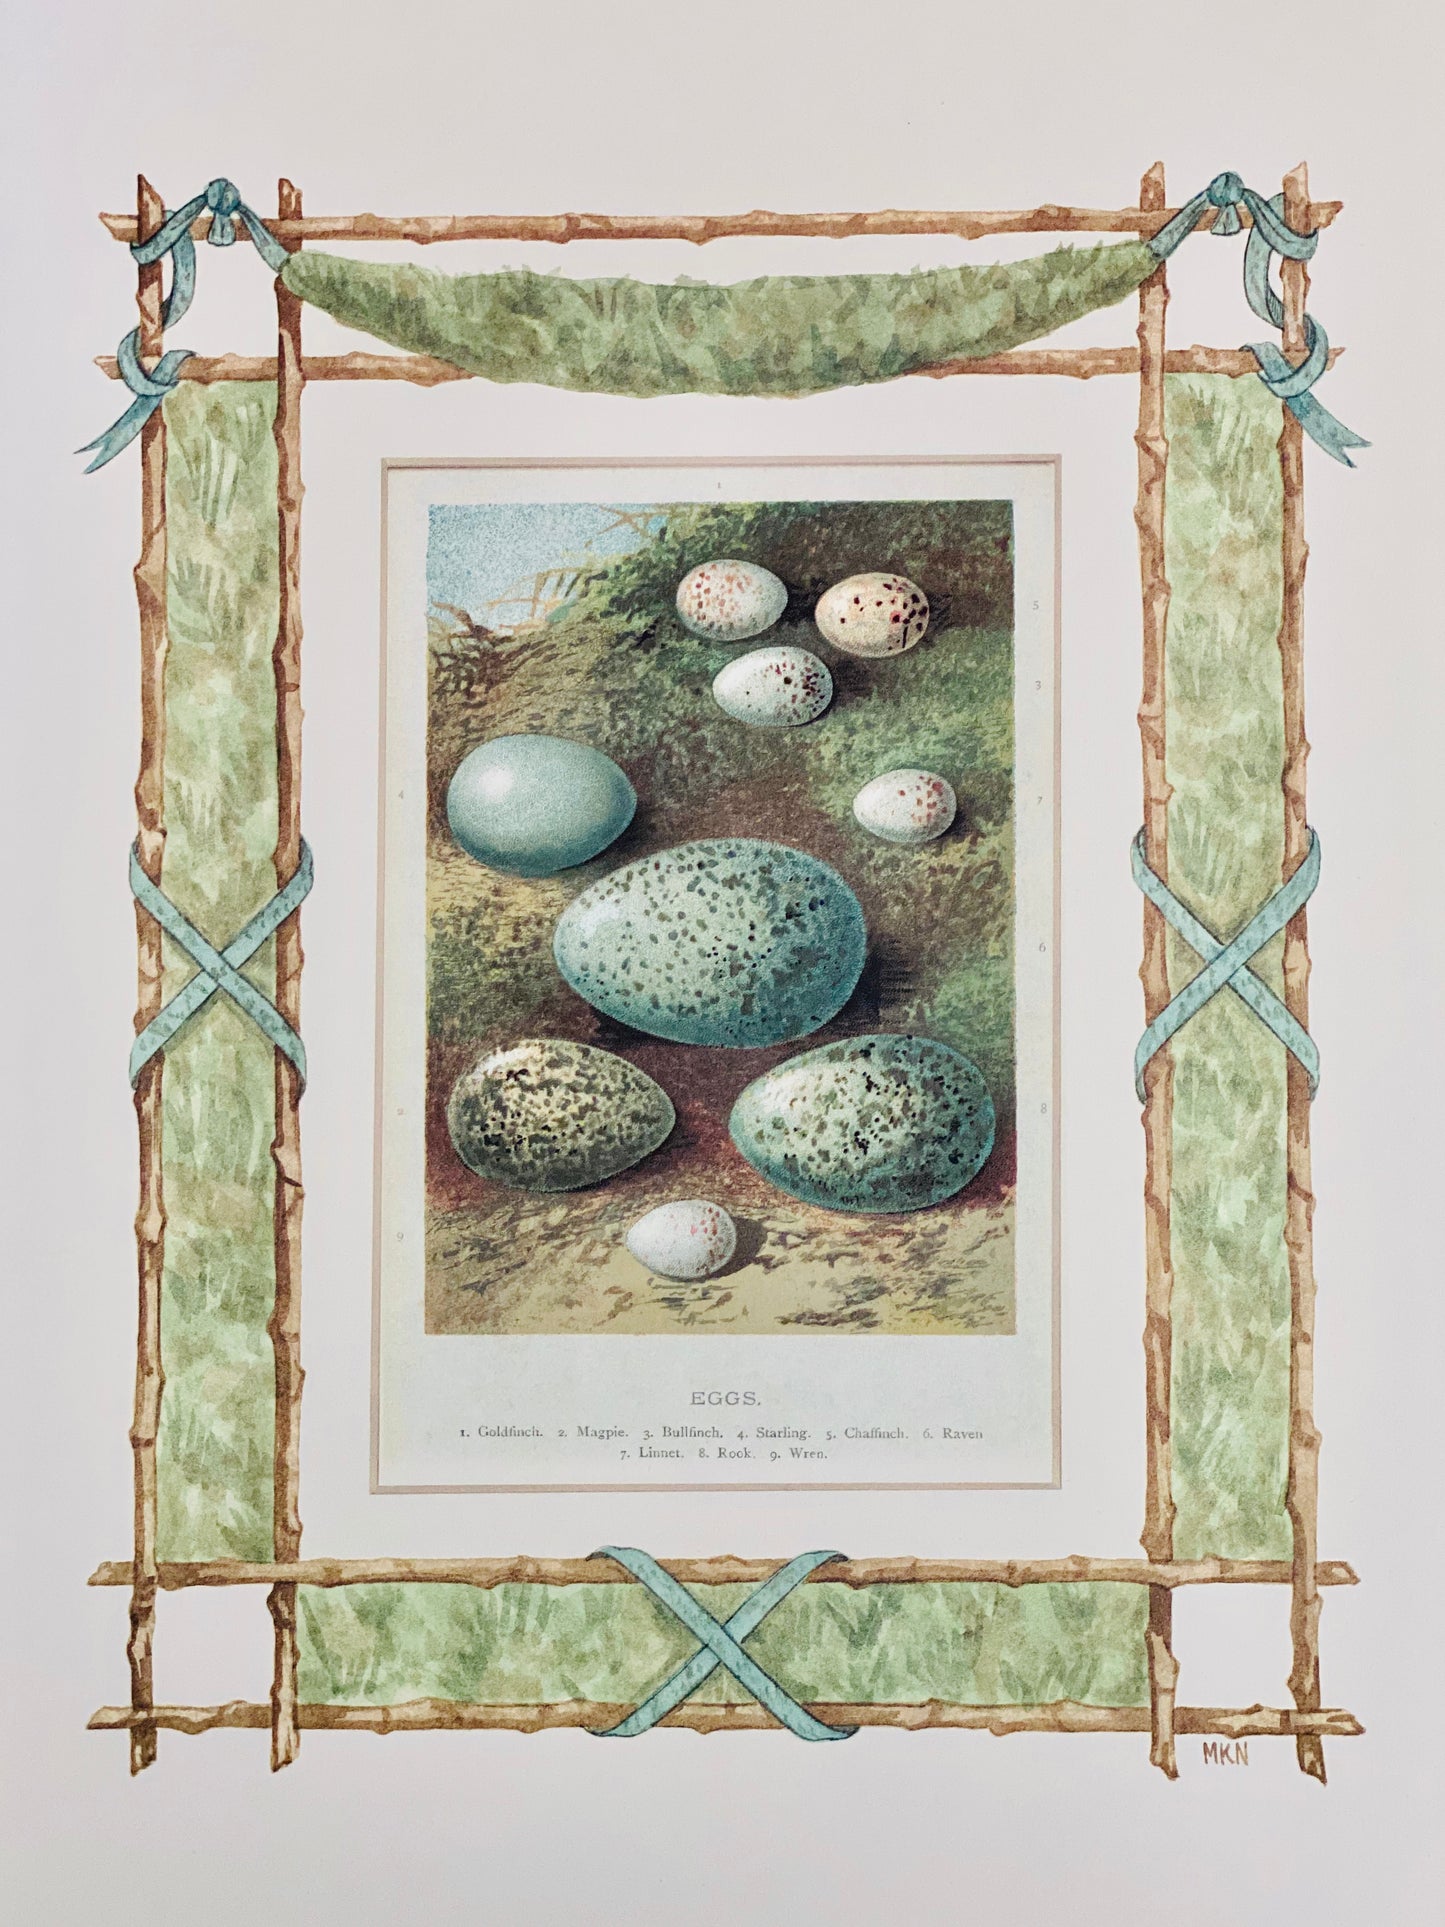 Nest & Eggs antique print with hand-painted garland border